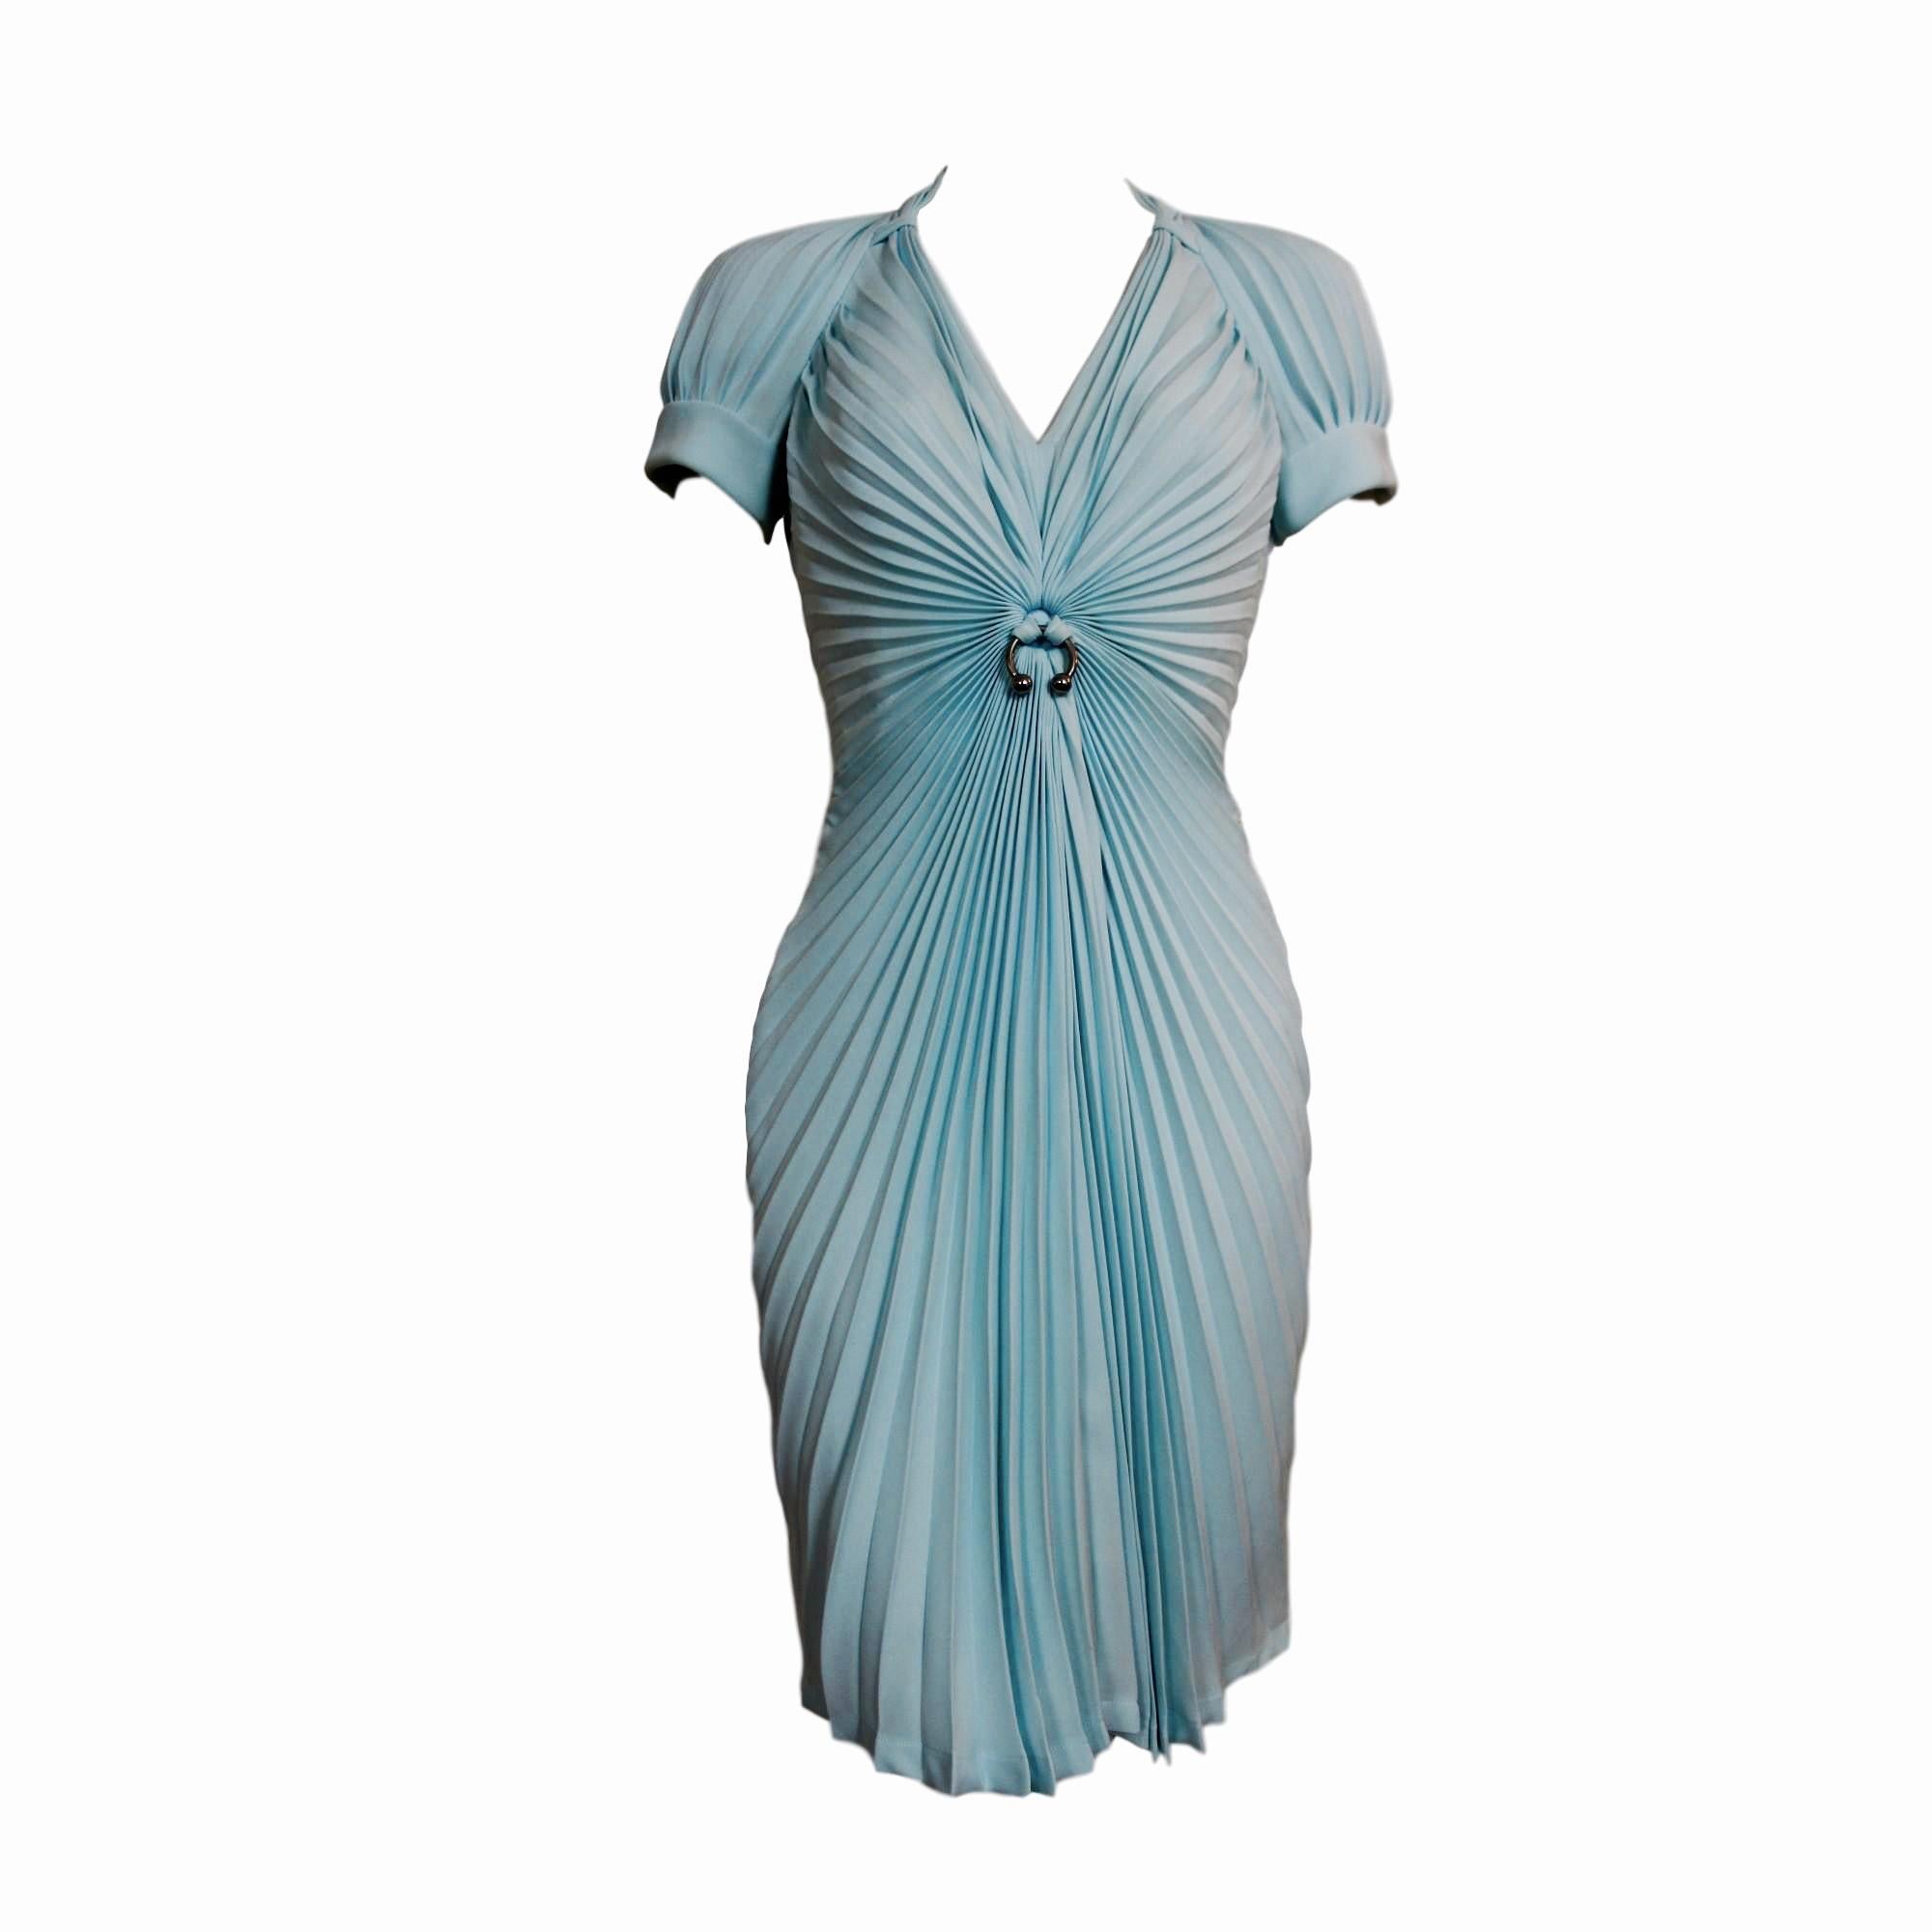 Thierry Mugler Starburst Pleated Dress For Sale 5